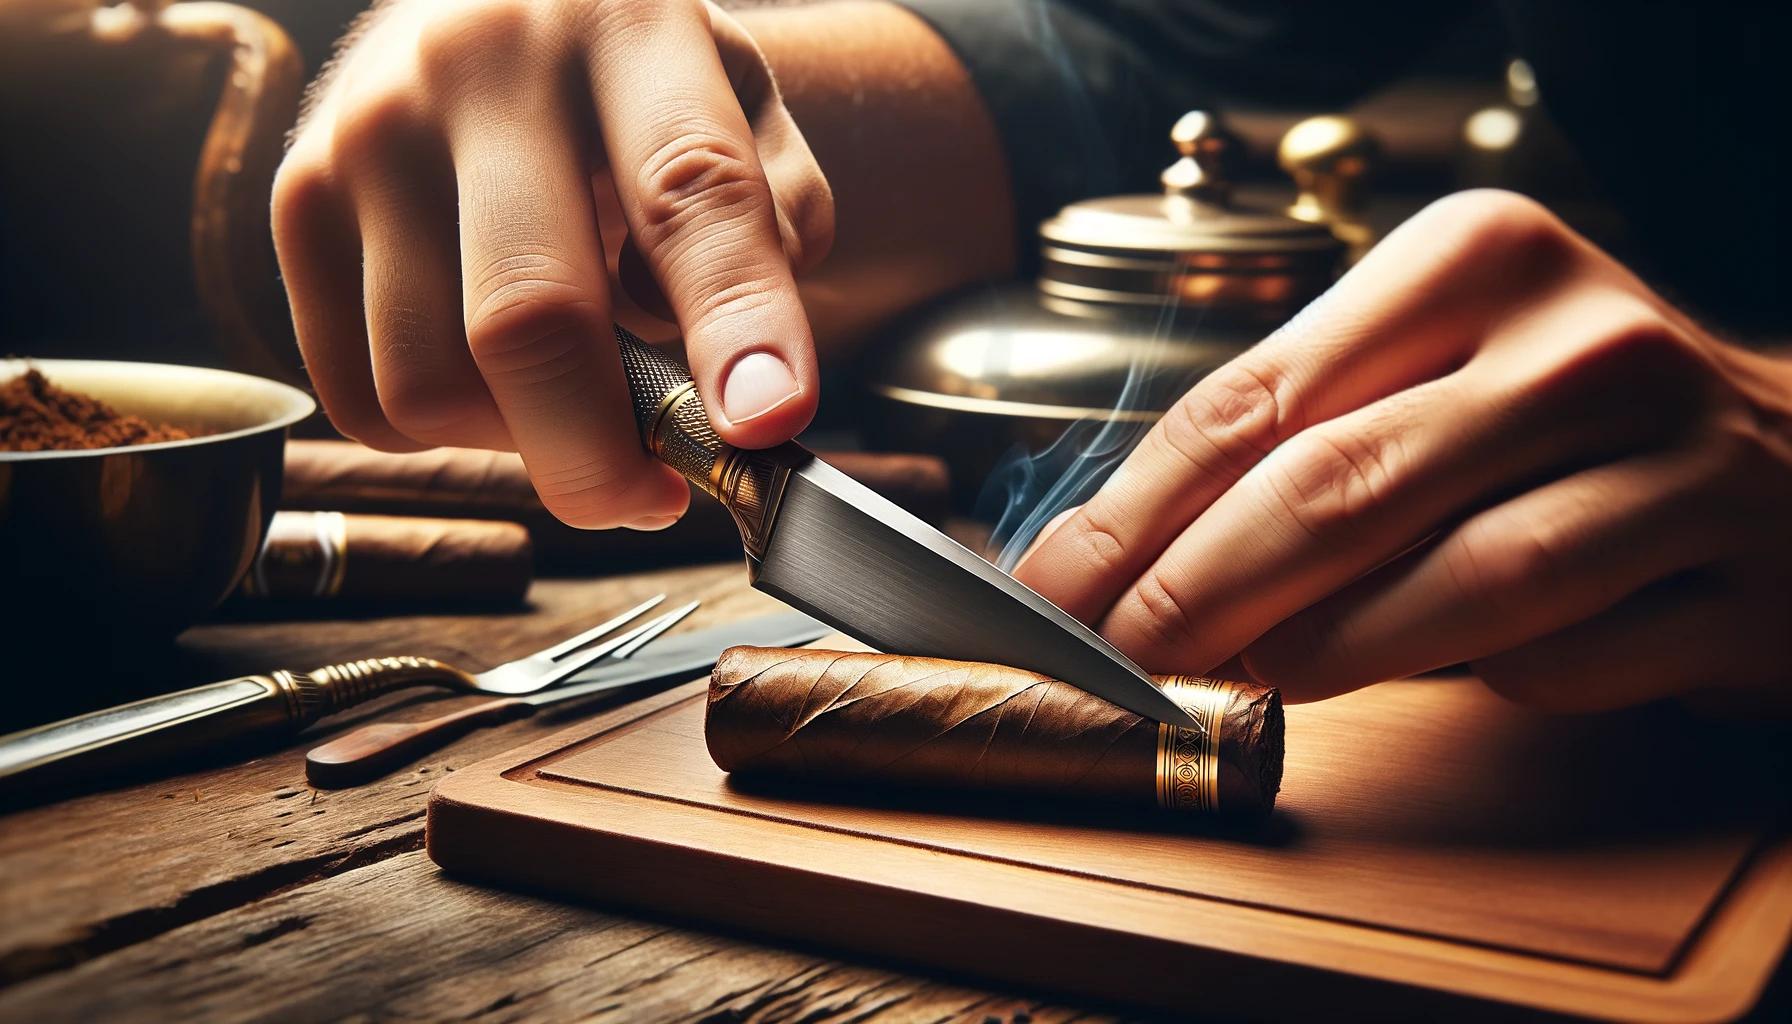 How to Cut a Cigar with a Knife